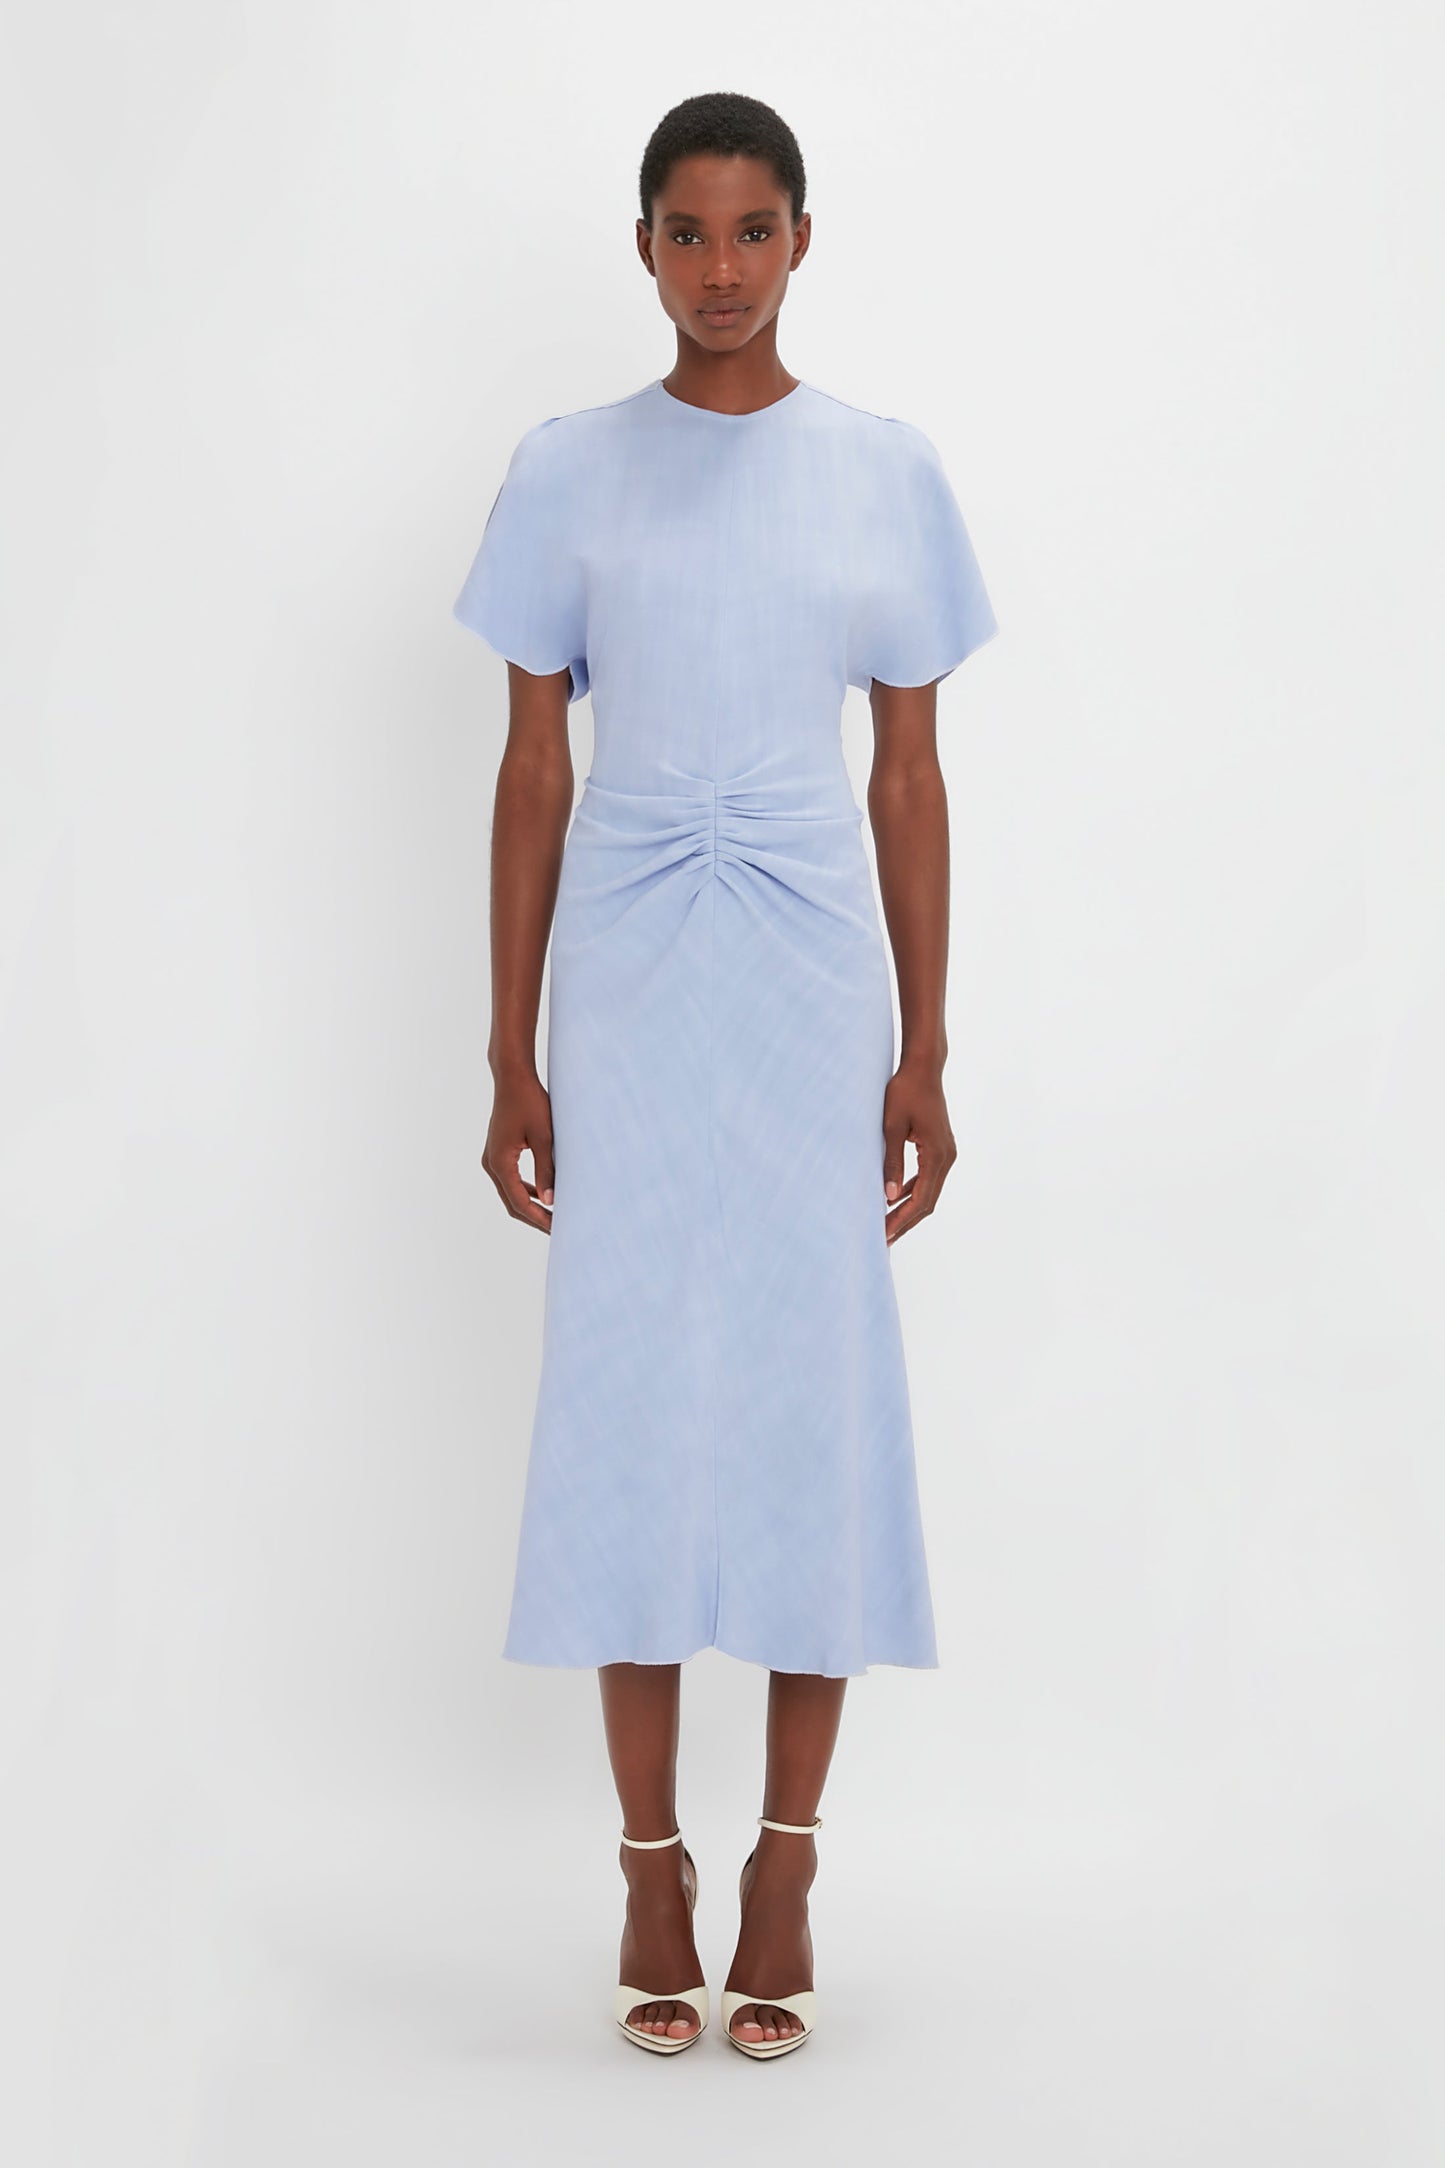 A black woman stands against a white background, wearing a light blue, short-sleeved Gathered Waist Midi Dress In Frost by Victoria Beckham and white pointy toe stilettos.